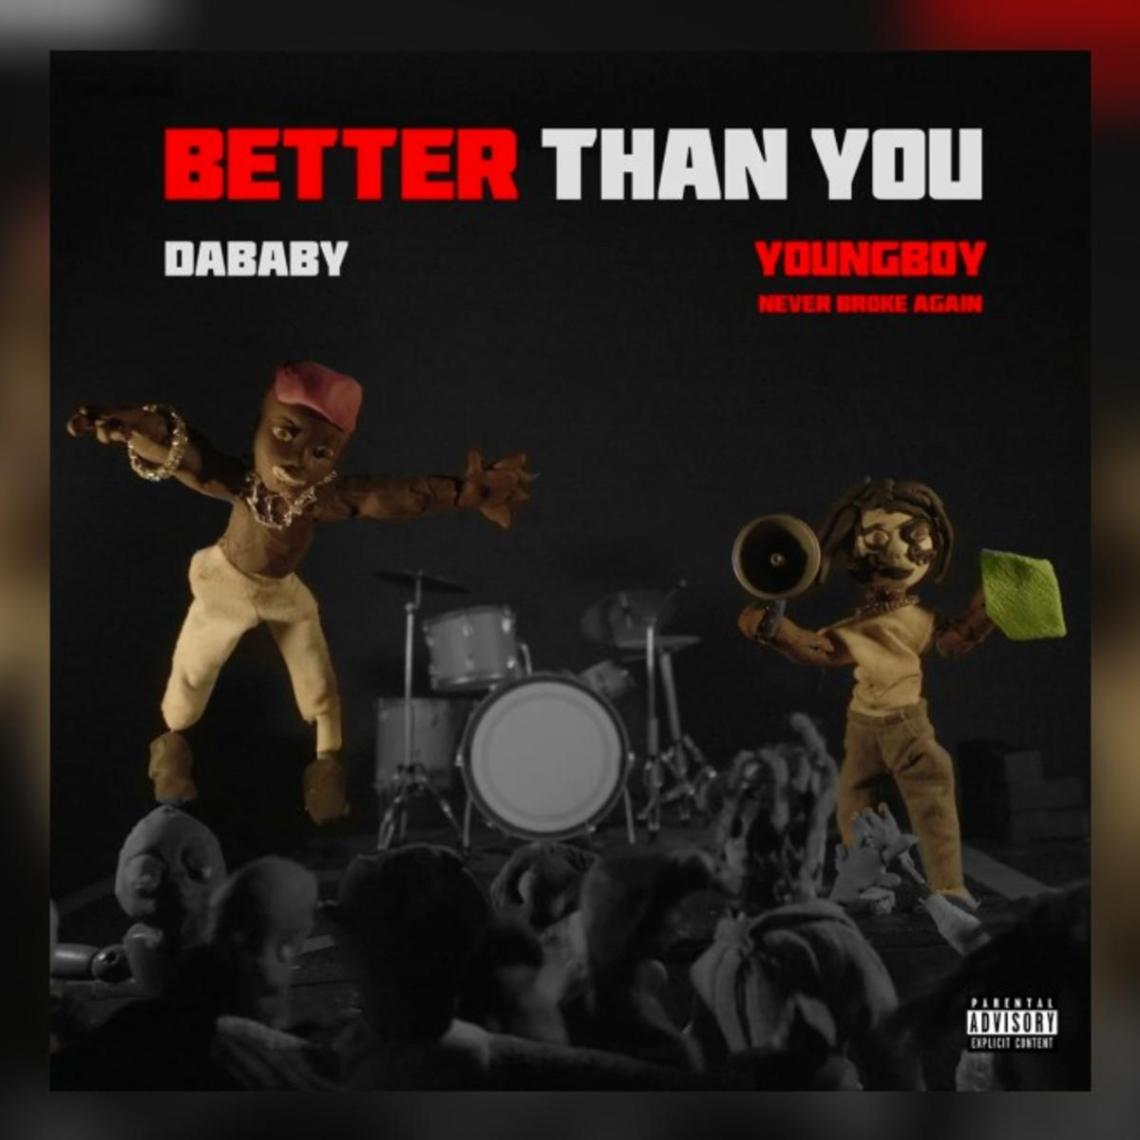 DOWNLOAD FULL ALBUM: "Better Than You" by DaBaby & NBA YoungBoy